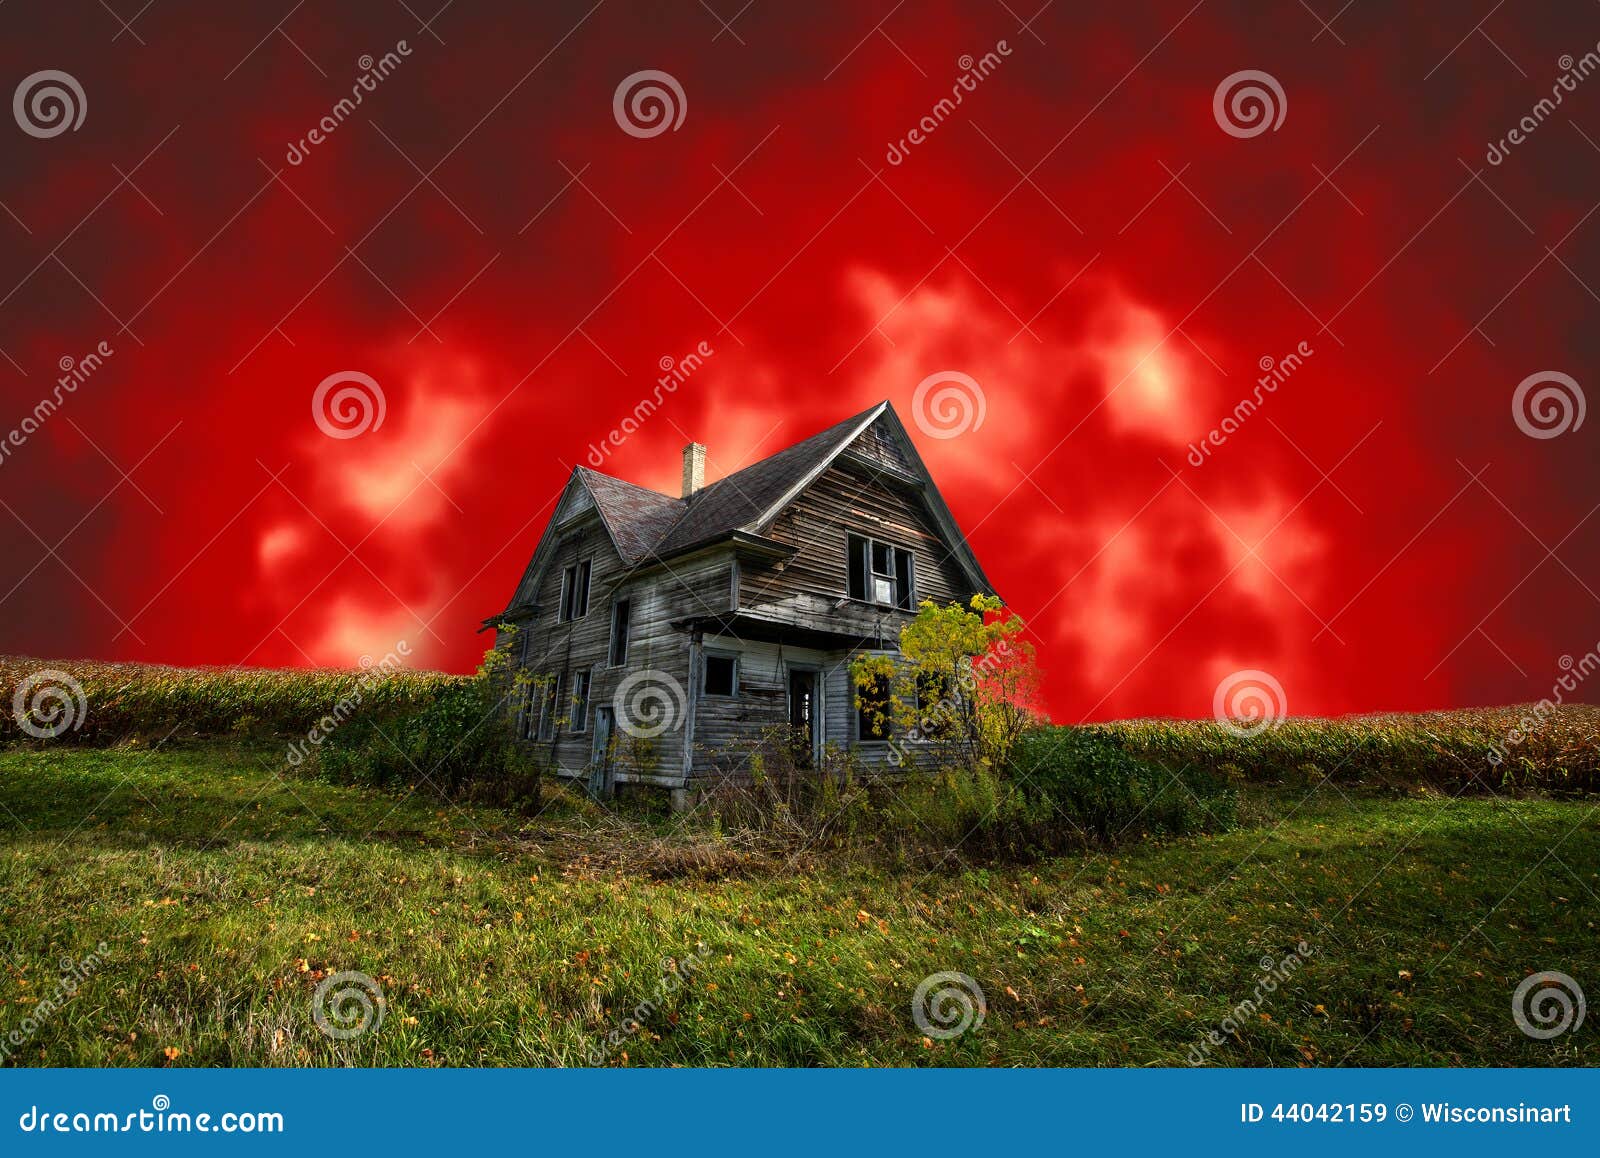 Scary Haunted Halloween House with Evil Red Sky Stock Image - Image of ...